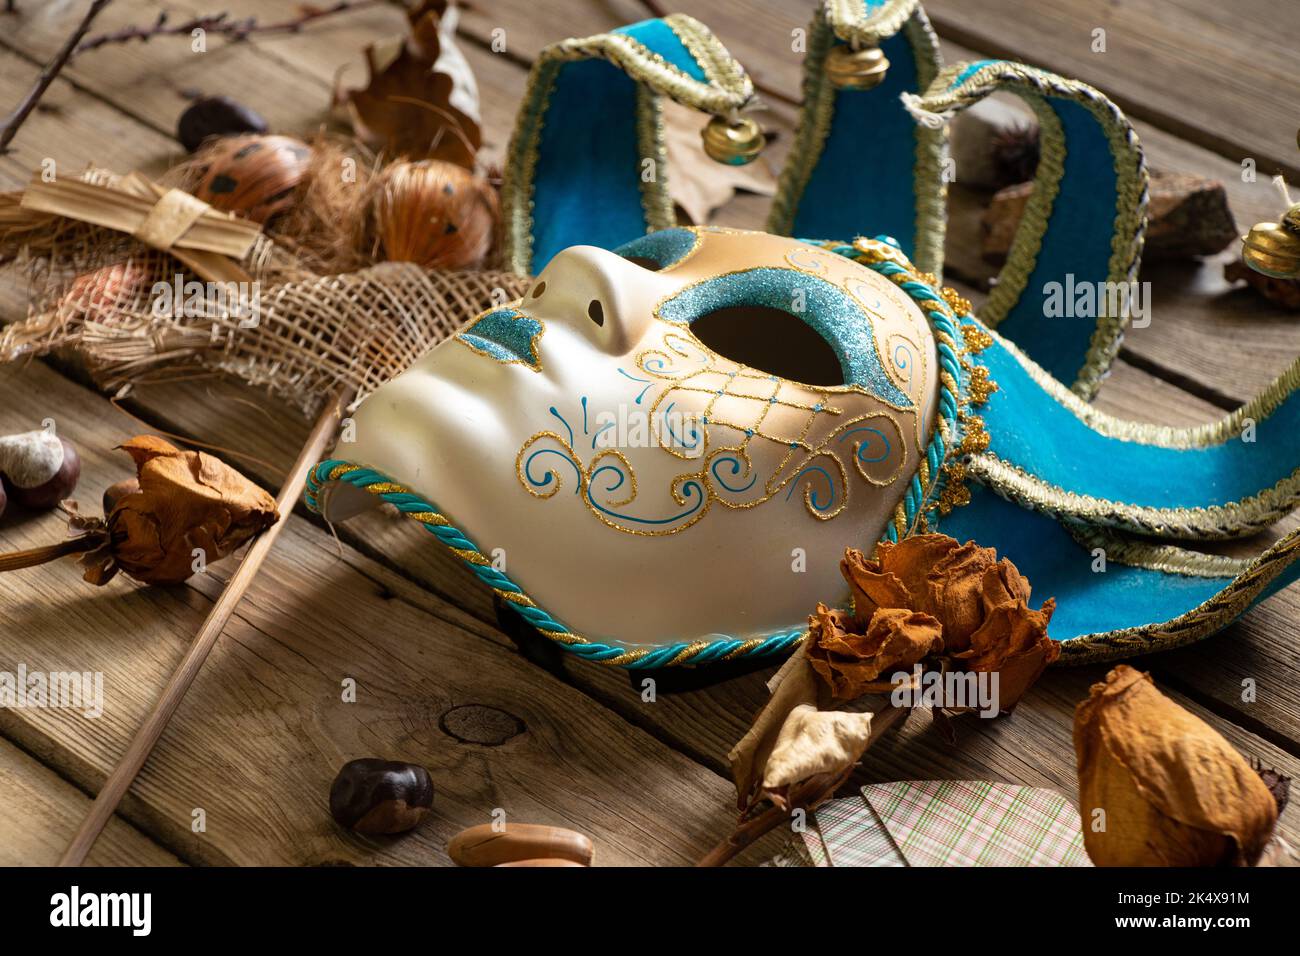 The Venetian mask lies on a wooden table with feather cards and voodoo dolls and shamanic items, mystery and mysticism Stock Photo